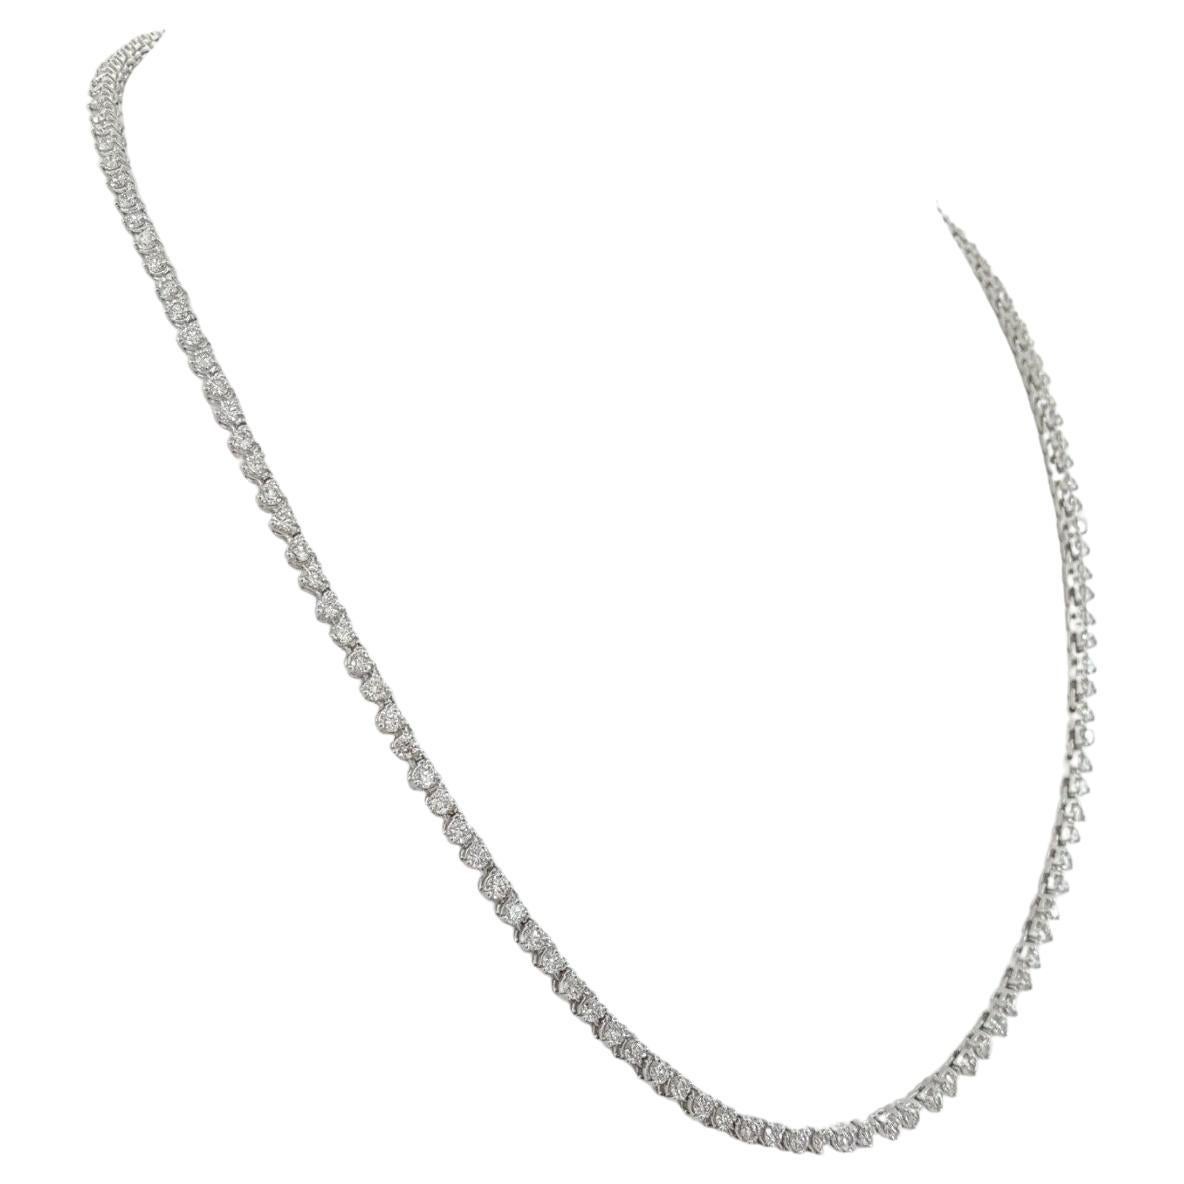 Round Cut 5.41 Carat Total Weight Round Brilliant Cut Diamonds Necklace For Sale